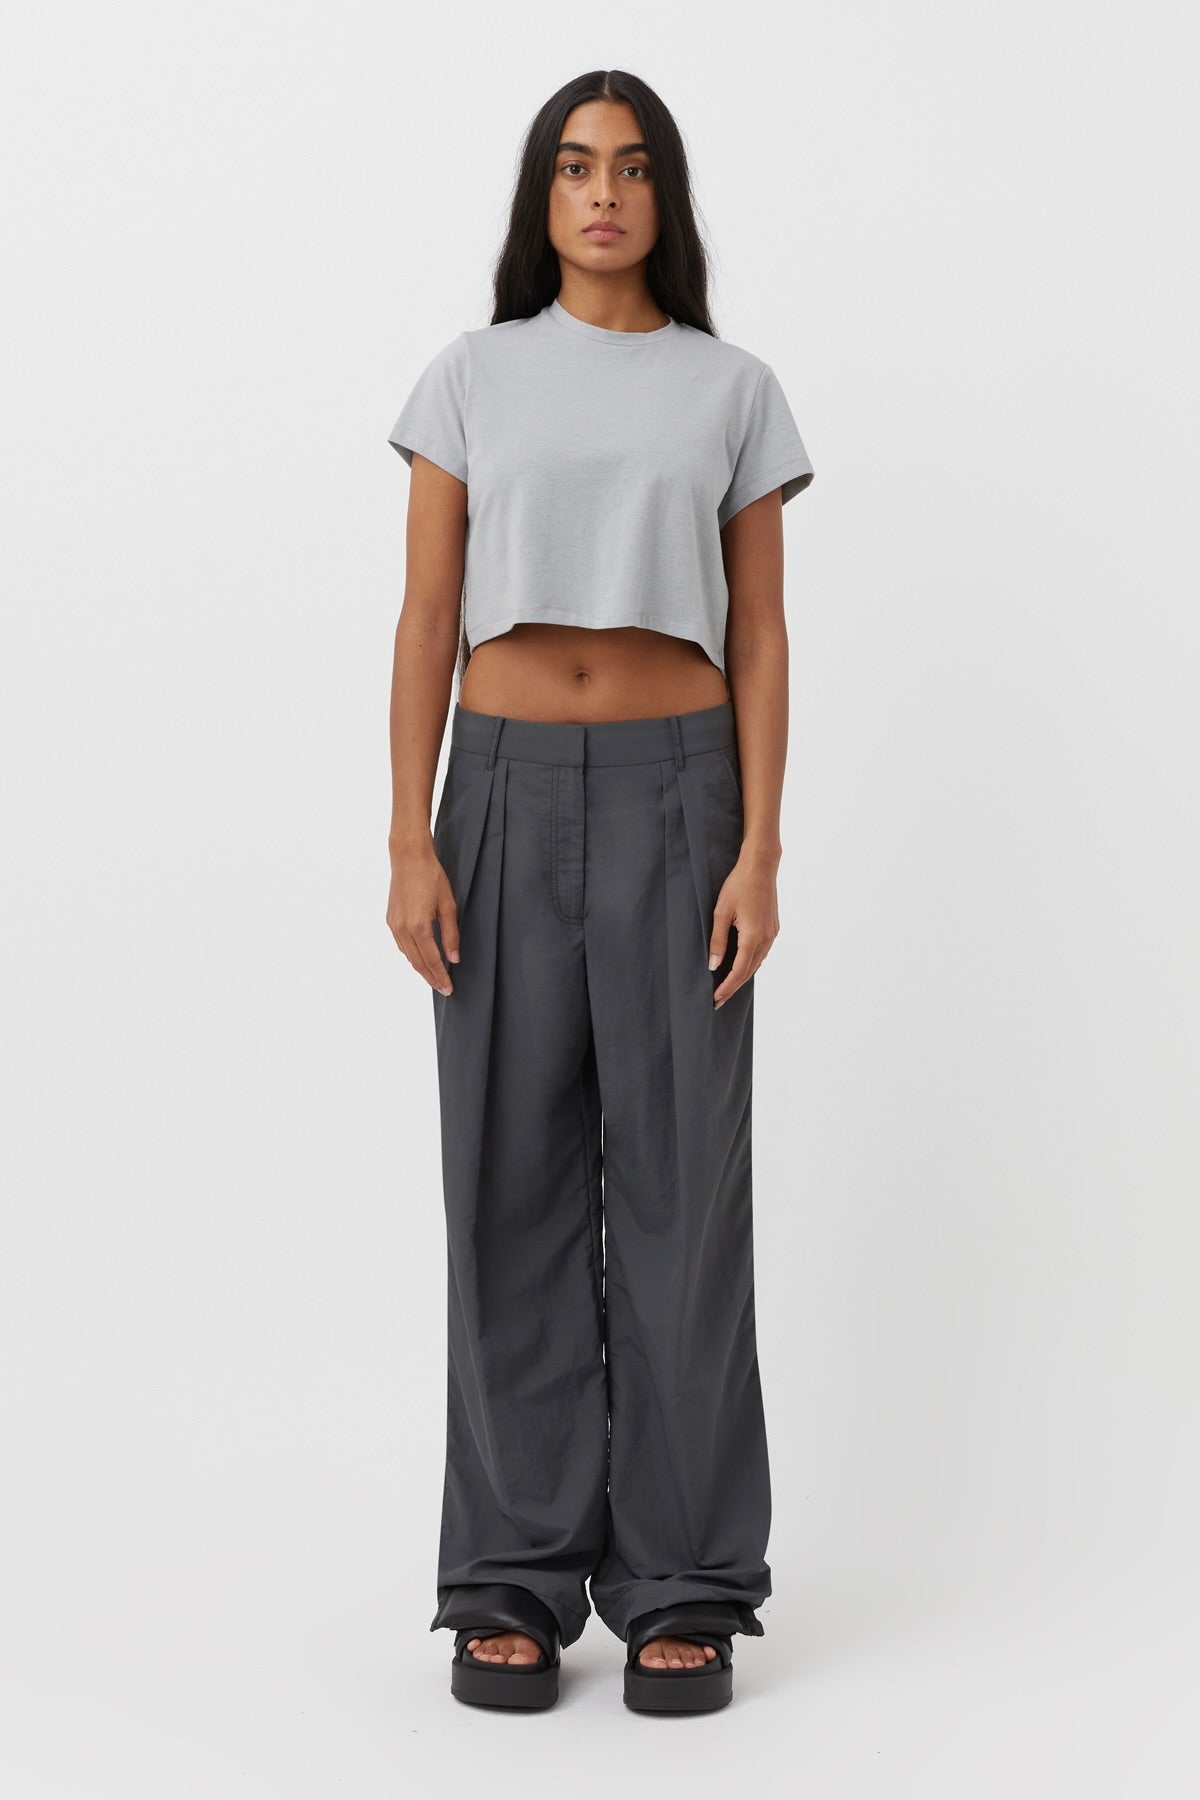 Camilla And Marc | Halazia Cropped Tee Light Grey Marle | Girls With G…